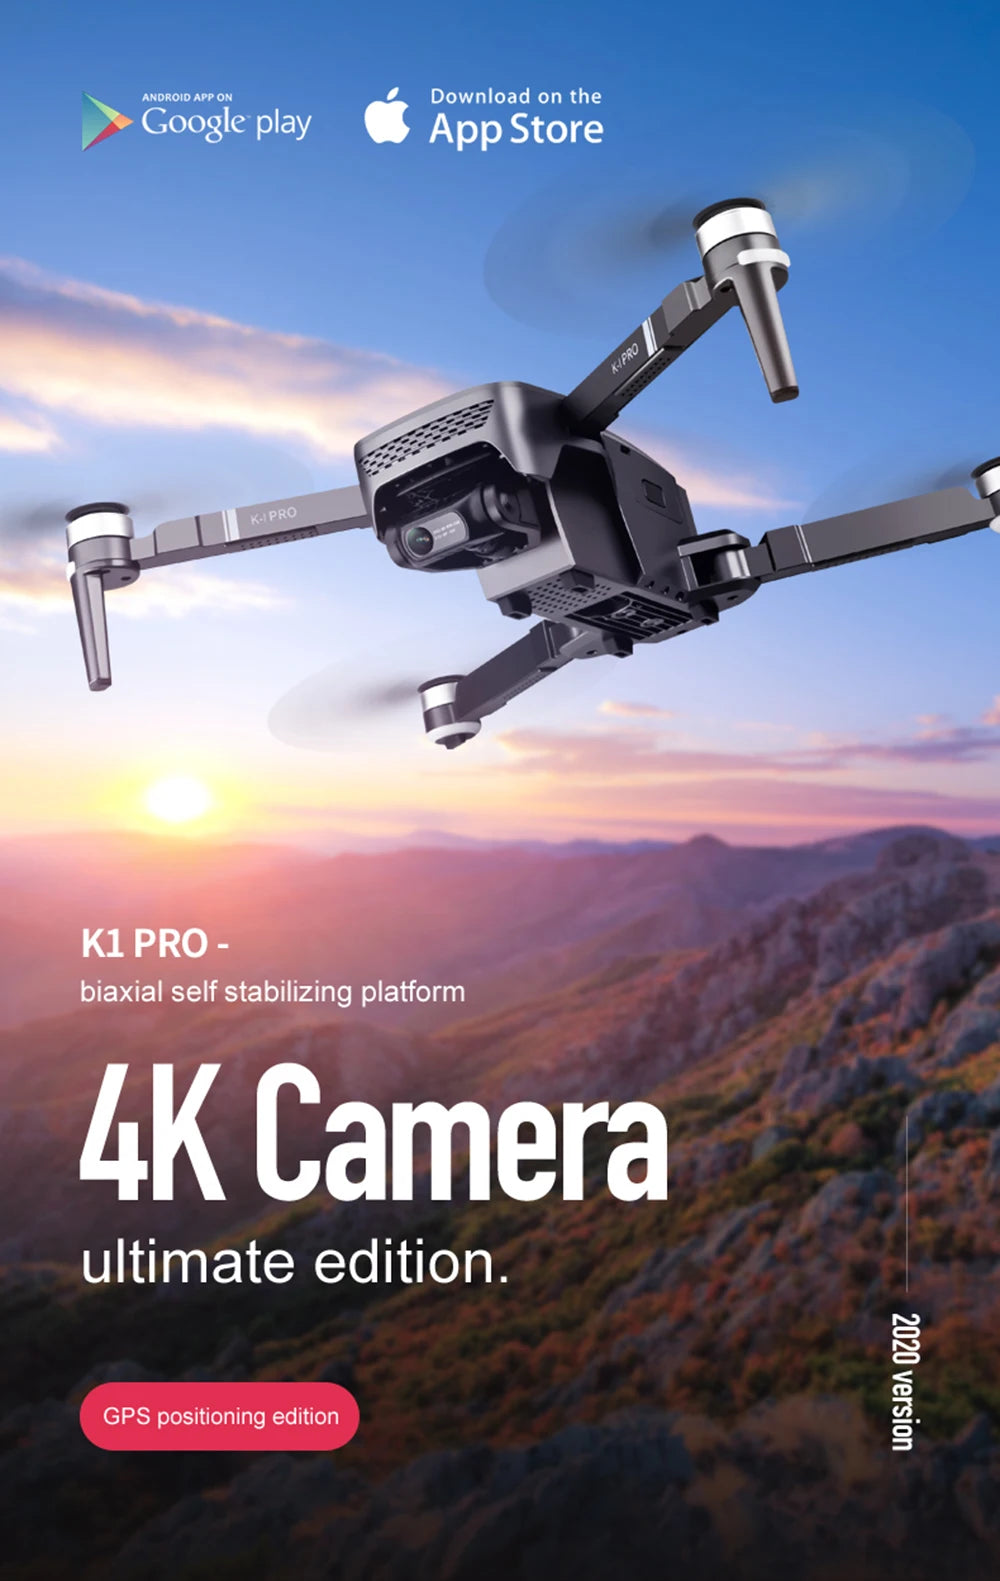 VISUO ZEN K1 PRO Drone, ANDROID APPON Download on the Google play Store K1PRO biaxial self stabil